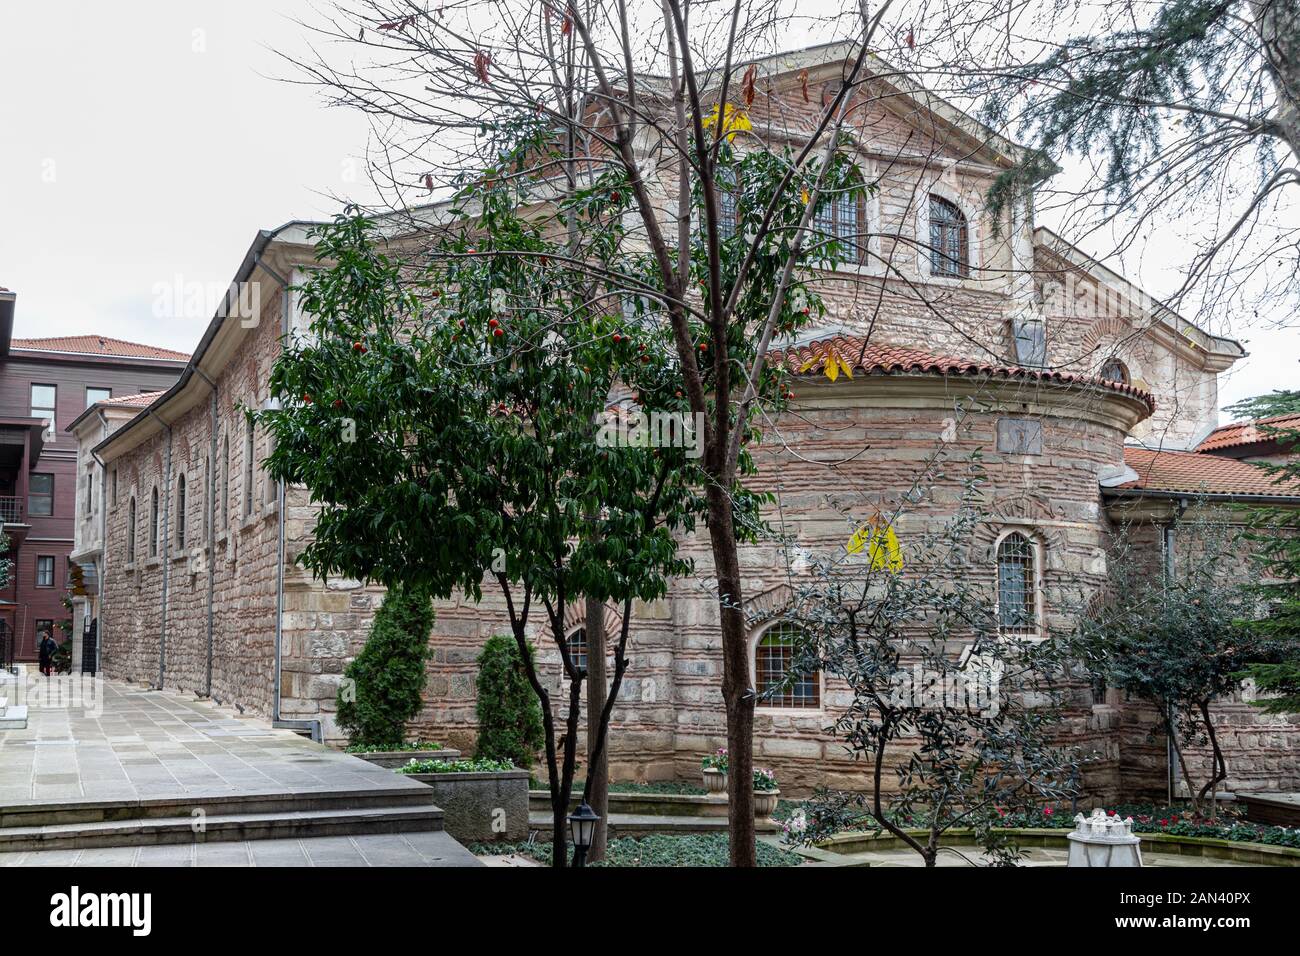 Balat, Fatih, Istanbul / Turkey - January 13 2020: The Patriarchal Church of St. George, Constantinople Ecumenical Orthodox Patriarchate exterior view Stock Photo